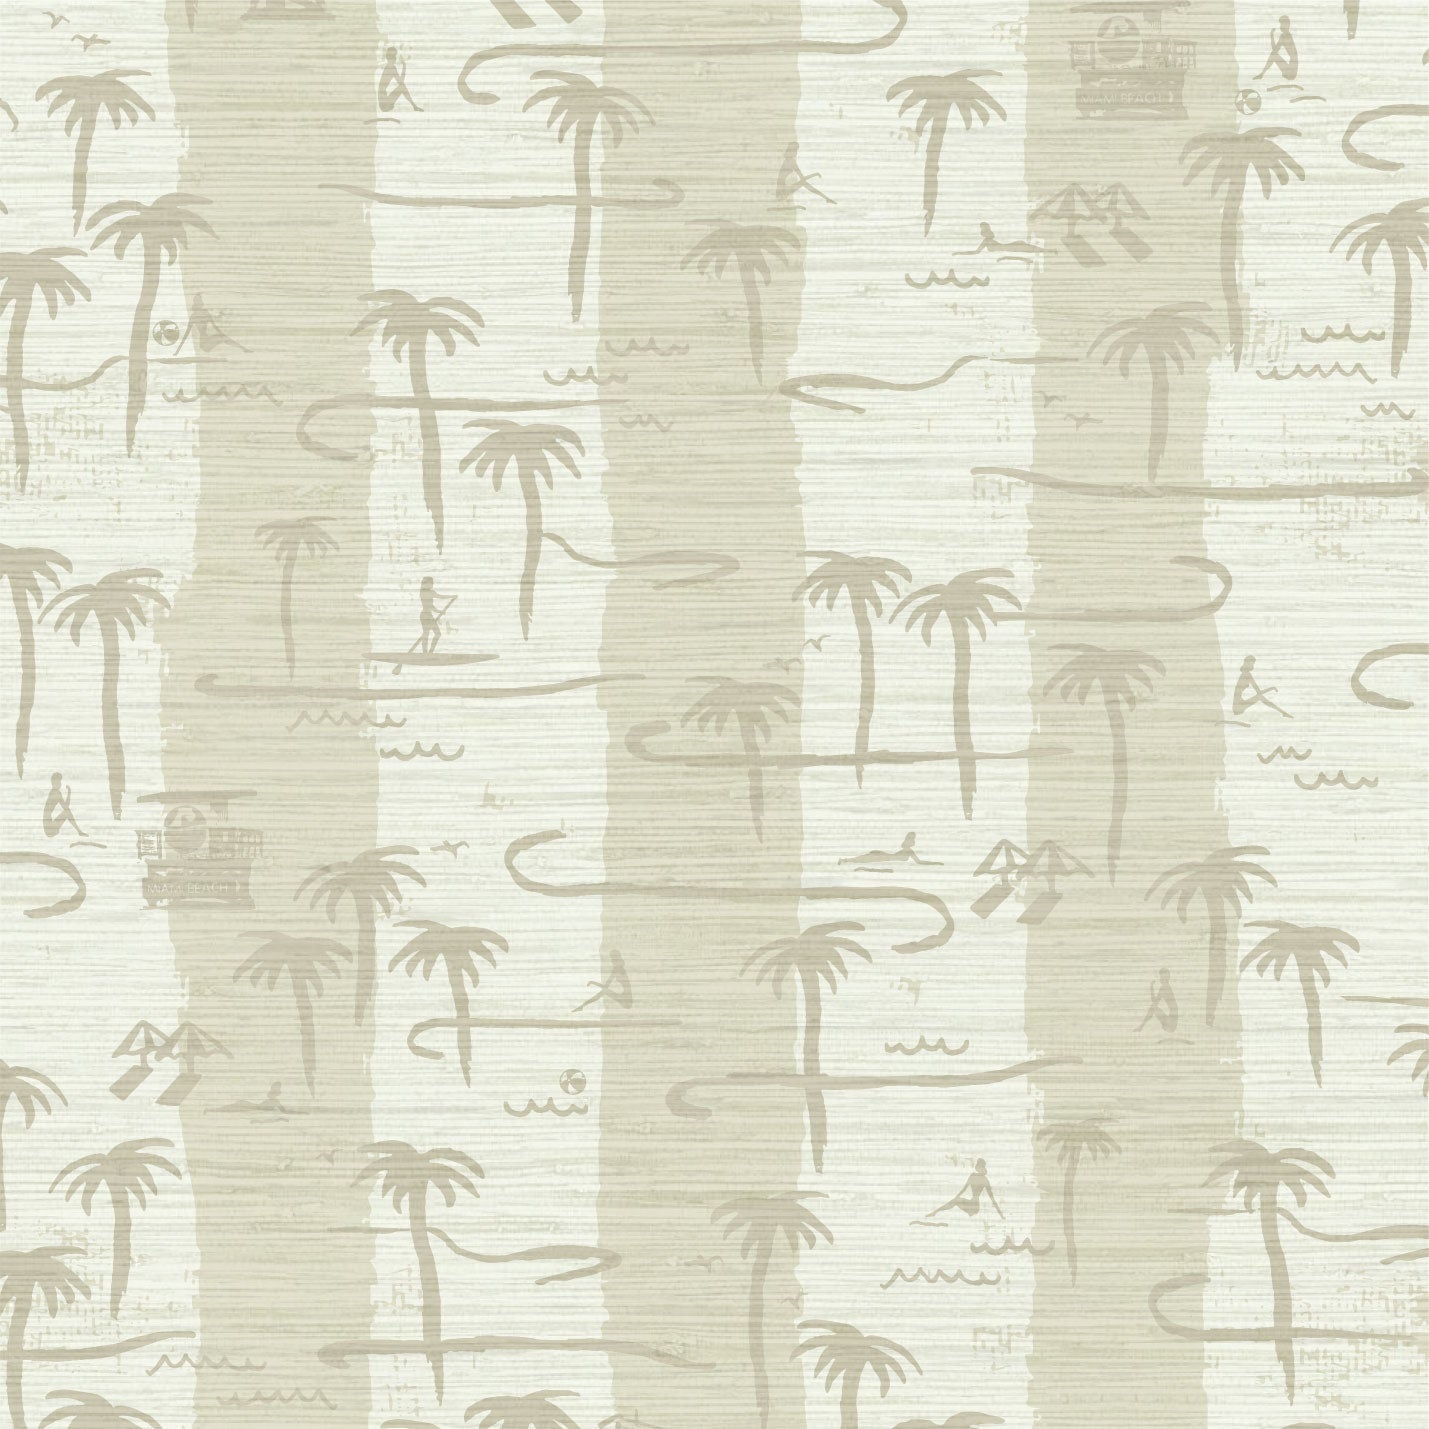 two color vertical stripe beach print featuring palm trees, beachgoers, lifeguard stands and ocean waves Grasscloth Natural Textured Eco-Friendly Non-toxic High-quality Sustainable practices Sustainability Interior Design Wall covering Bold Wallpaper Custom Tailor-made Retro chic Tropical Seaside Coastal Seashore Waterfront Vacation home styling Retreat Relaxed beach vibes Beach cottage Shoreline Oceanfront Nautical white tan sand cream offwhite sand